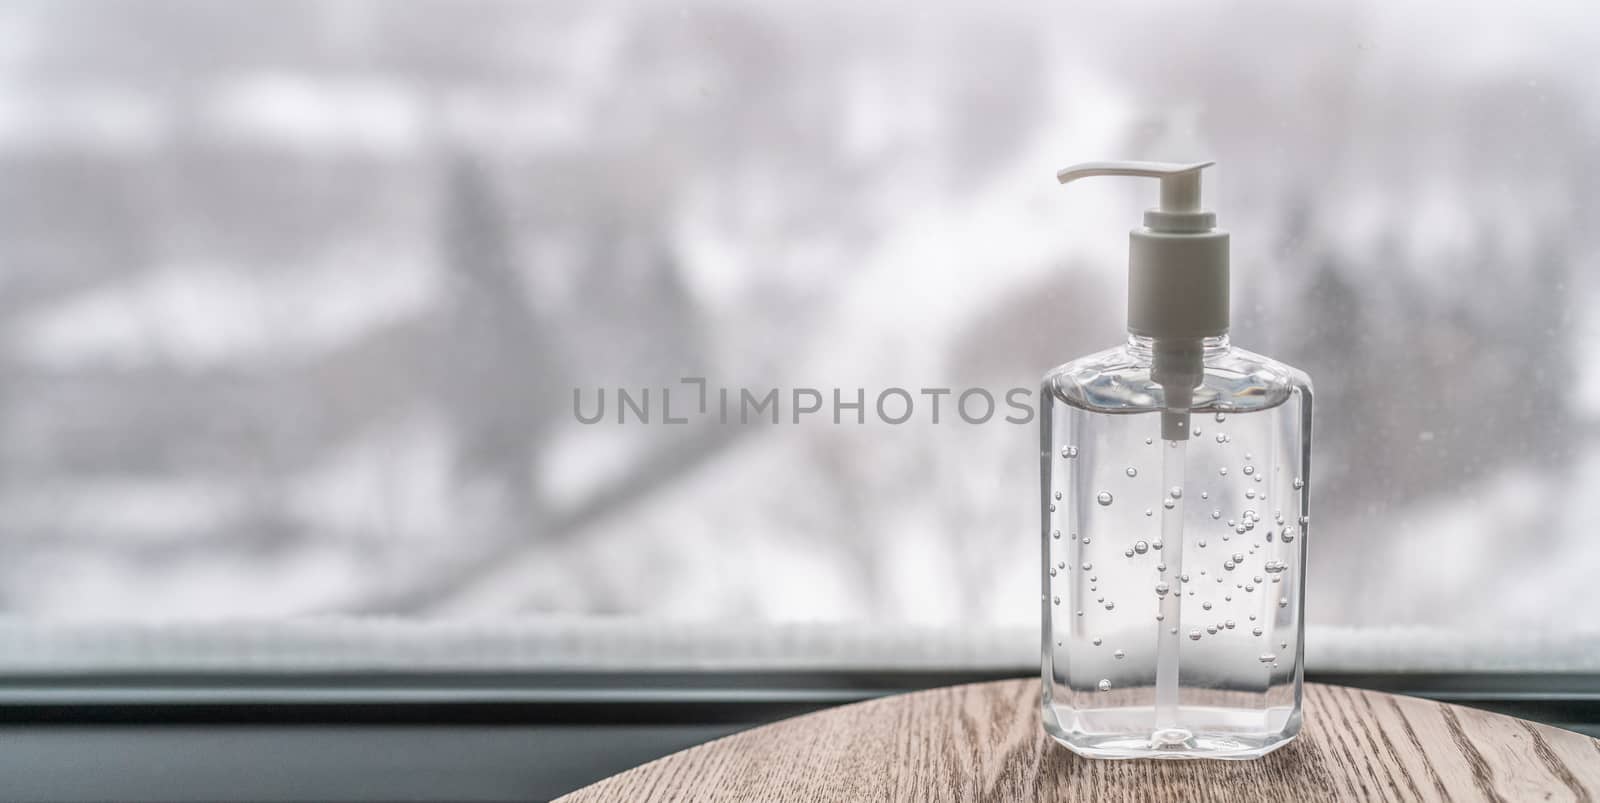 Coronavirus hand sanitizer gel to wash hands for flu virus prevention. Alcohol based antimicrobial disinfectant product for airport, hospital, healthcare and home panoramic banner background by Maridav